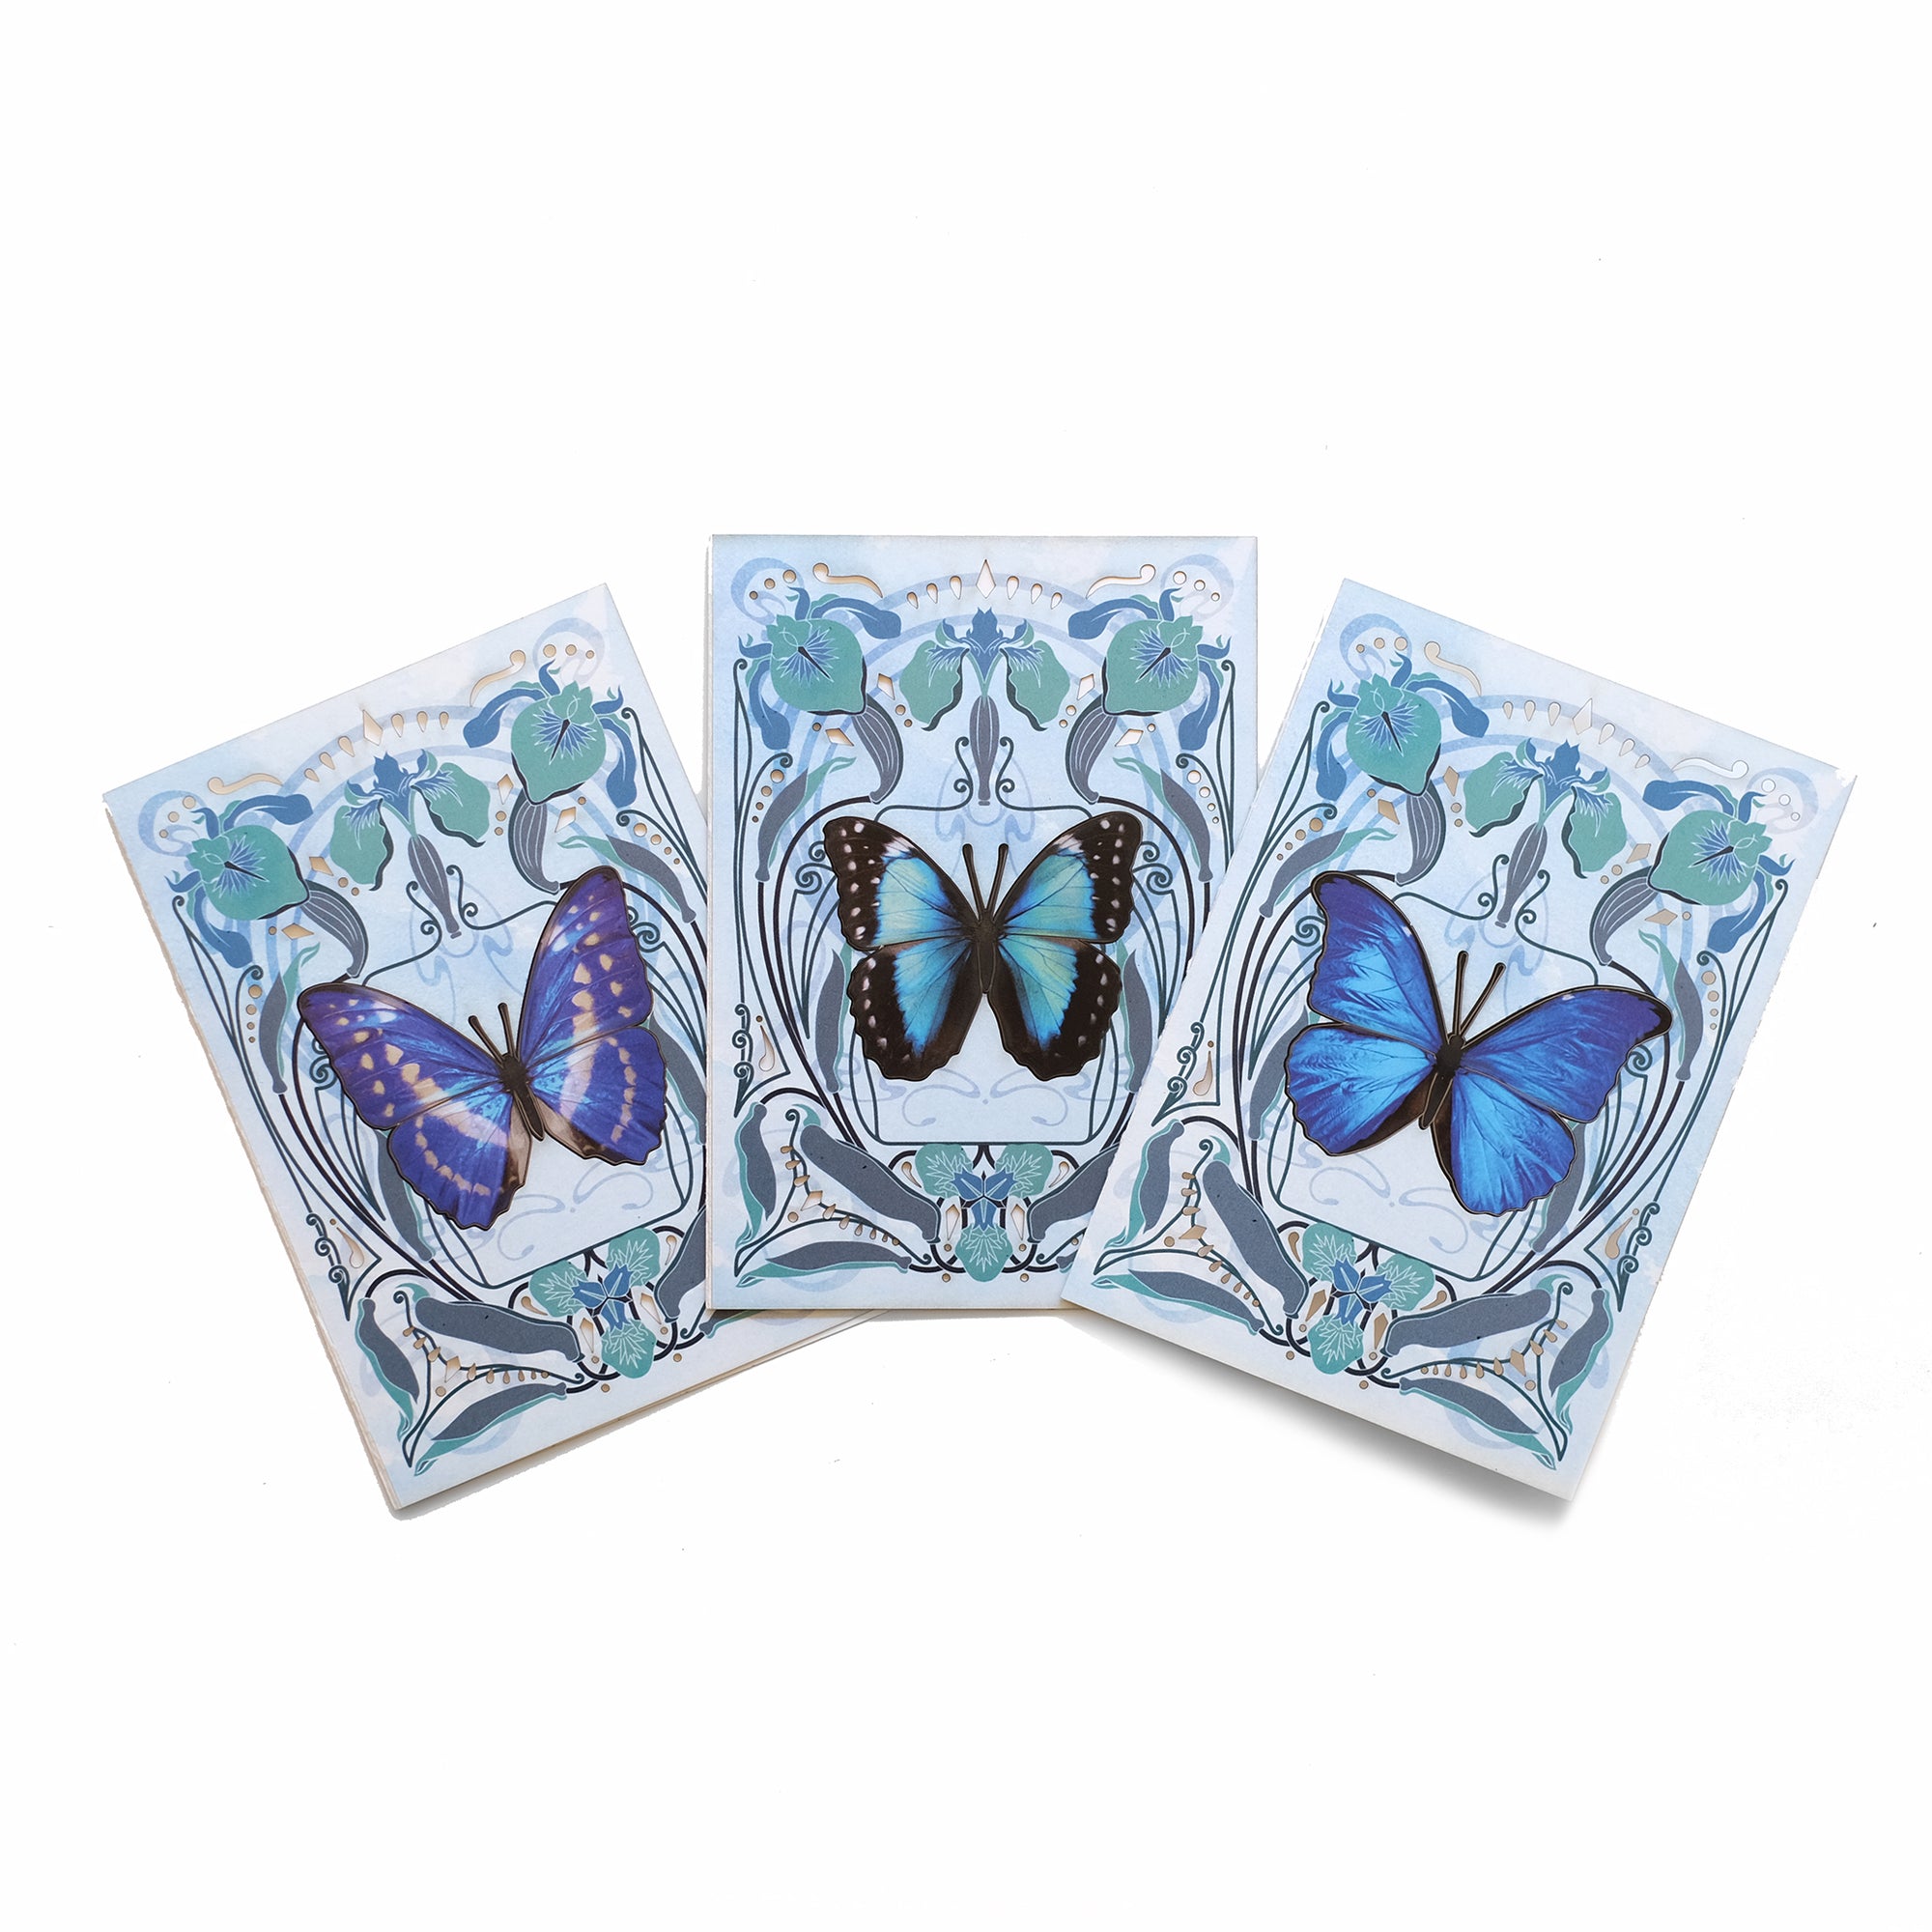 'Morpho' Butterfly 'Pop-Out' Greeting Cards - Set of 3